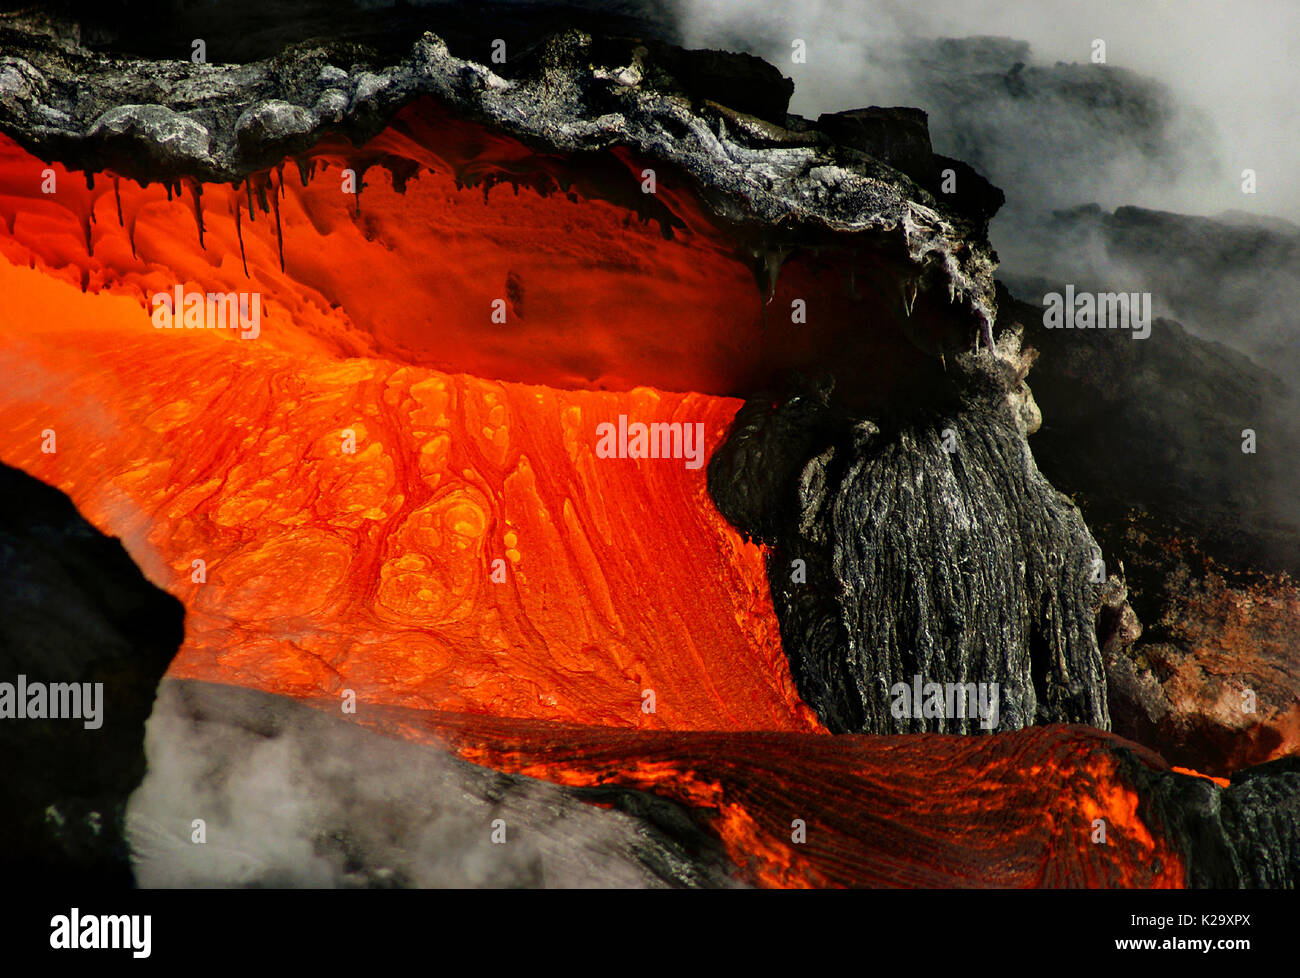 Big Island, Hawaii, USA. 4th Mar, 2007. Molten lava from the Kilauea Volcano forms a cavern as it nears the Pacific Ocean, the extreme temperature difference causing dramatic reactions about Kalapana, Hawaii. Credit: L.E. Baskow/ZUMA Wire/Alamy Live News Stock Photo